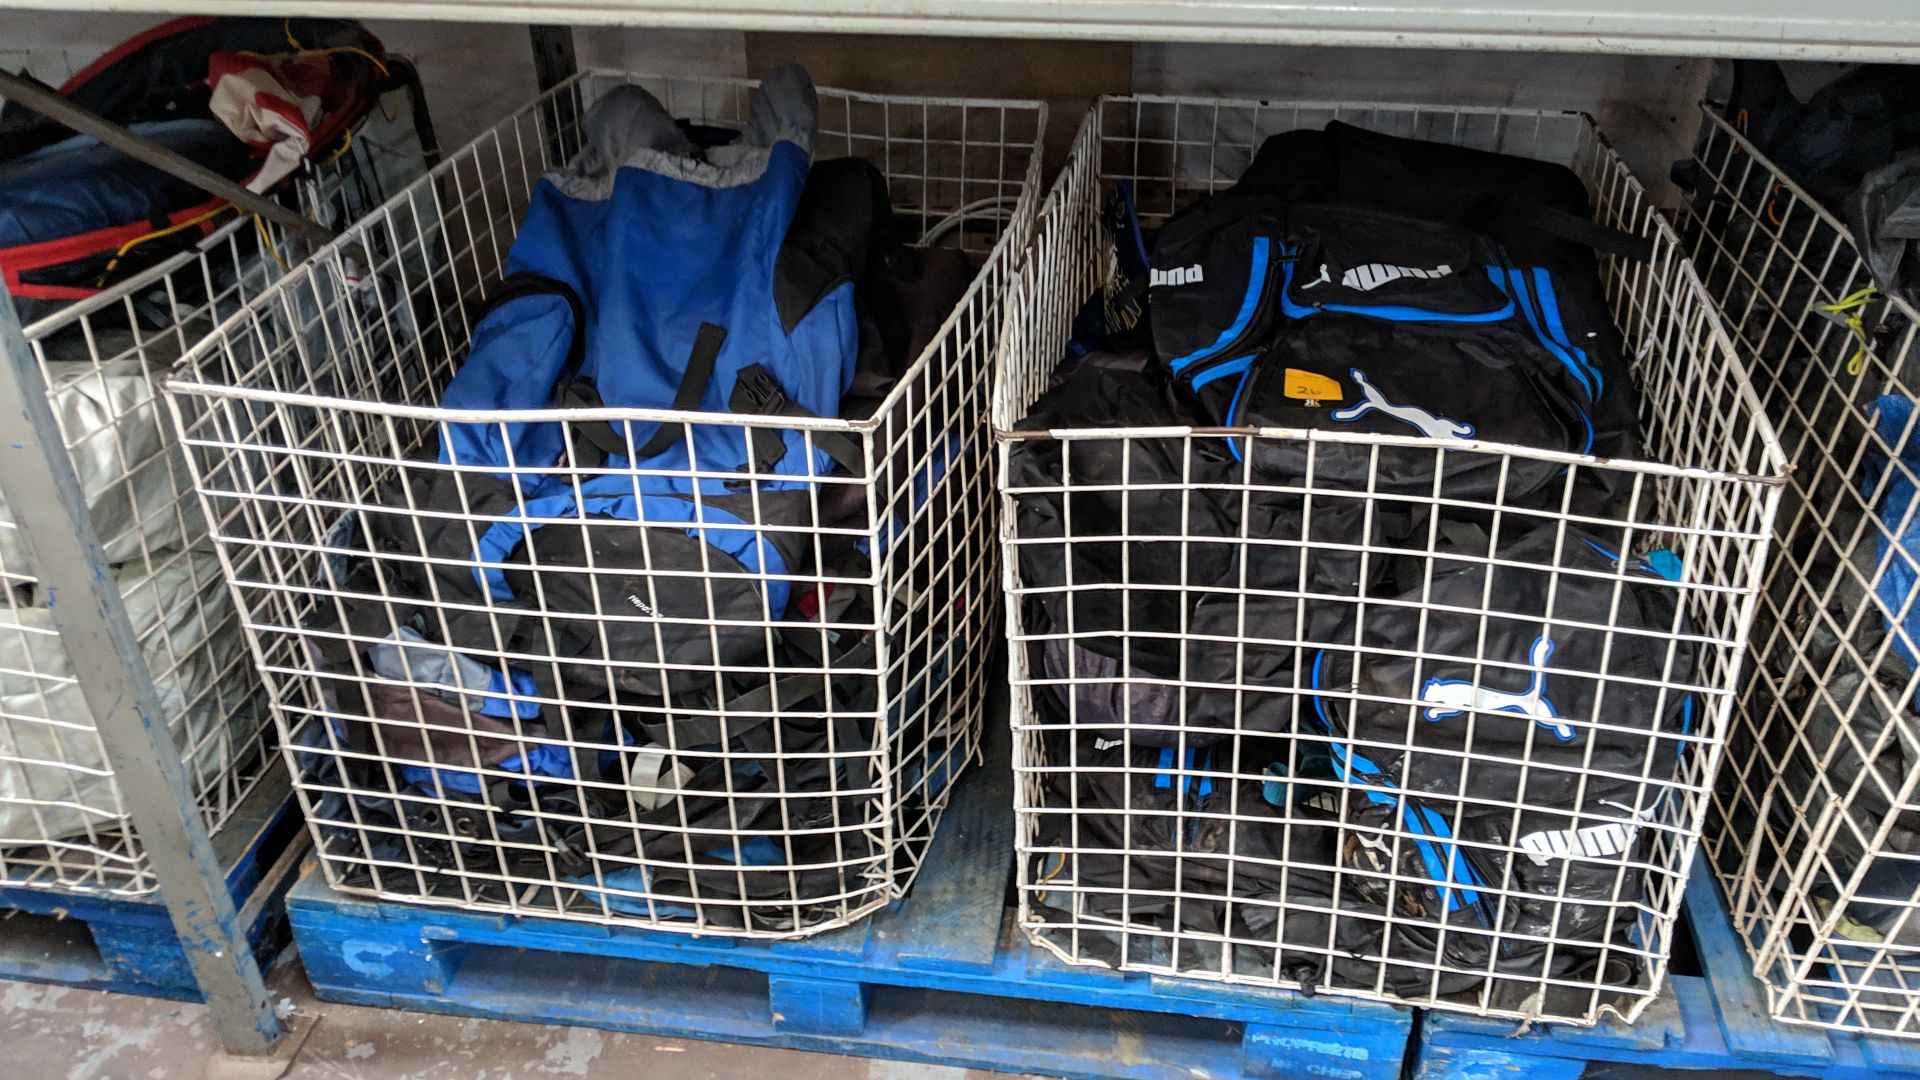 Contents of 2 large cages of assorted holdalls by Puma, Adidas & others - cages excluded